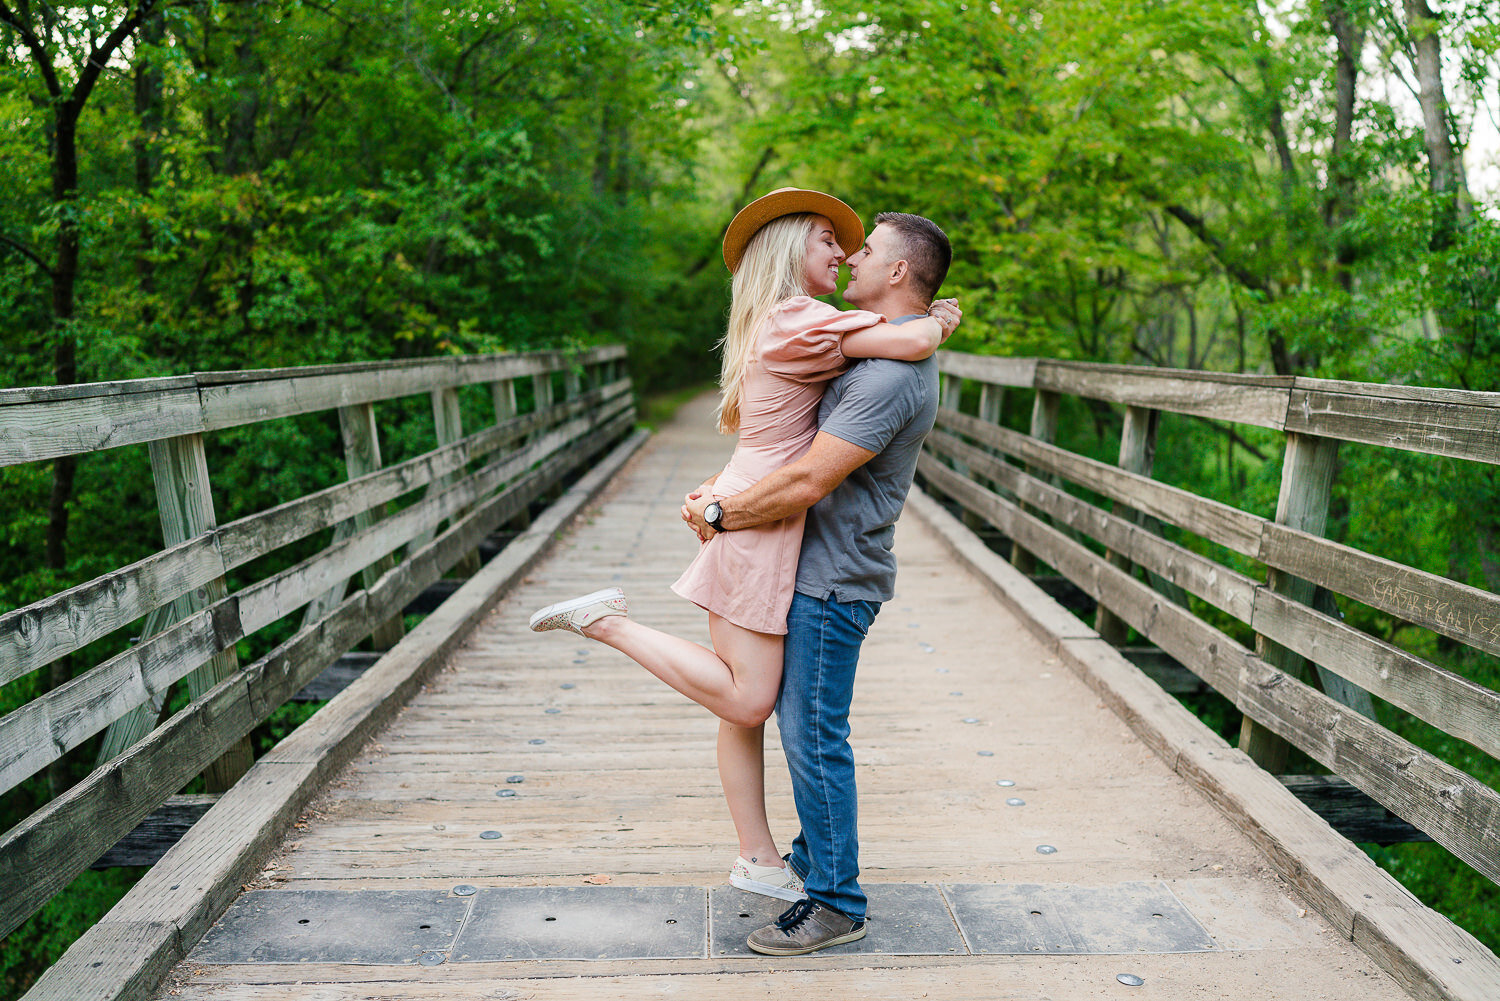 Man lifts woman dressed in pink dress and hat on a bridge.